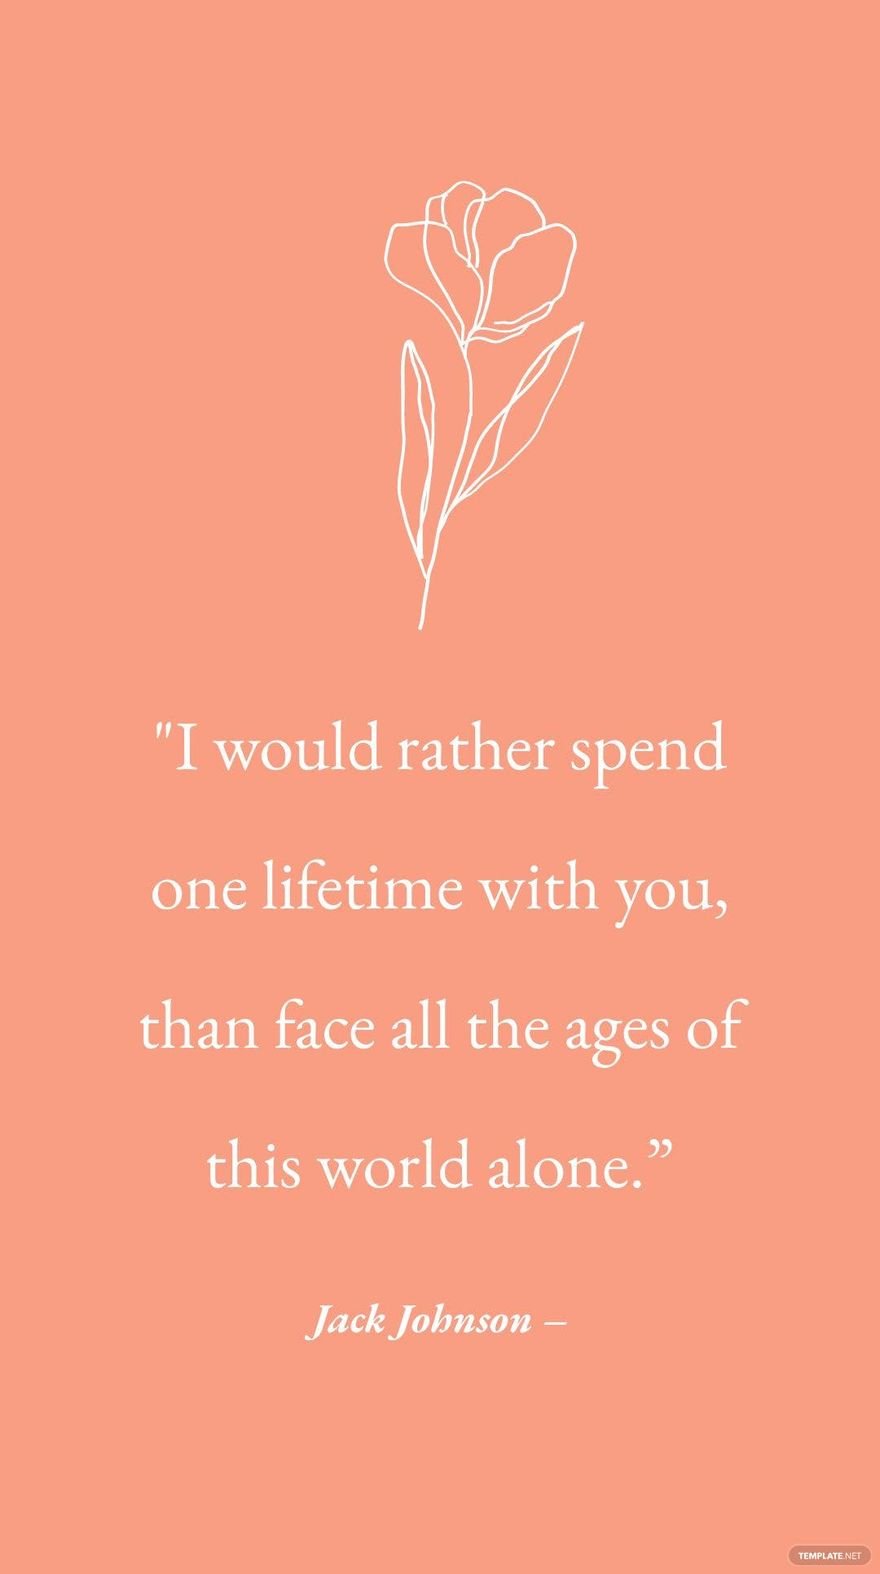 J.R.R. Tolkien – "I would rather spend one lifetime with you, than face all the ages of this world alone.”